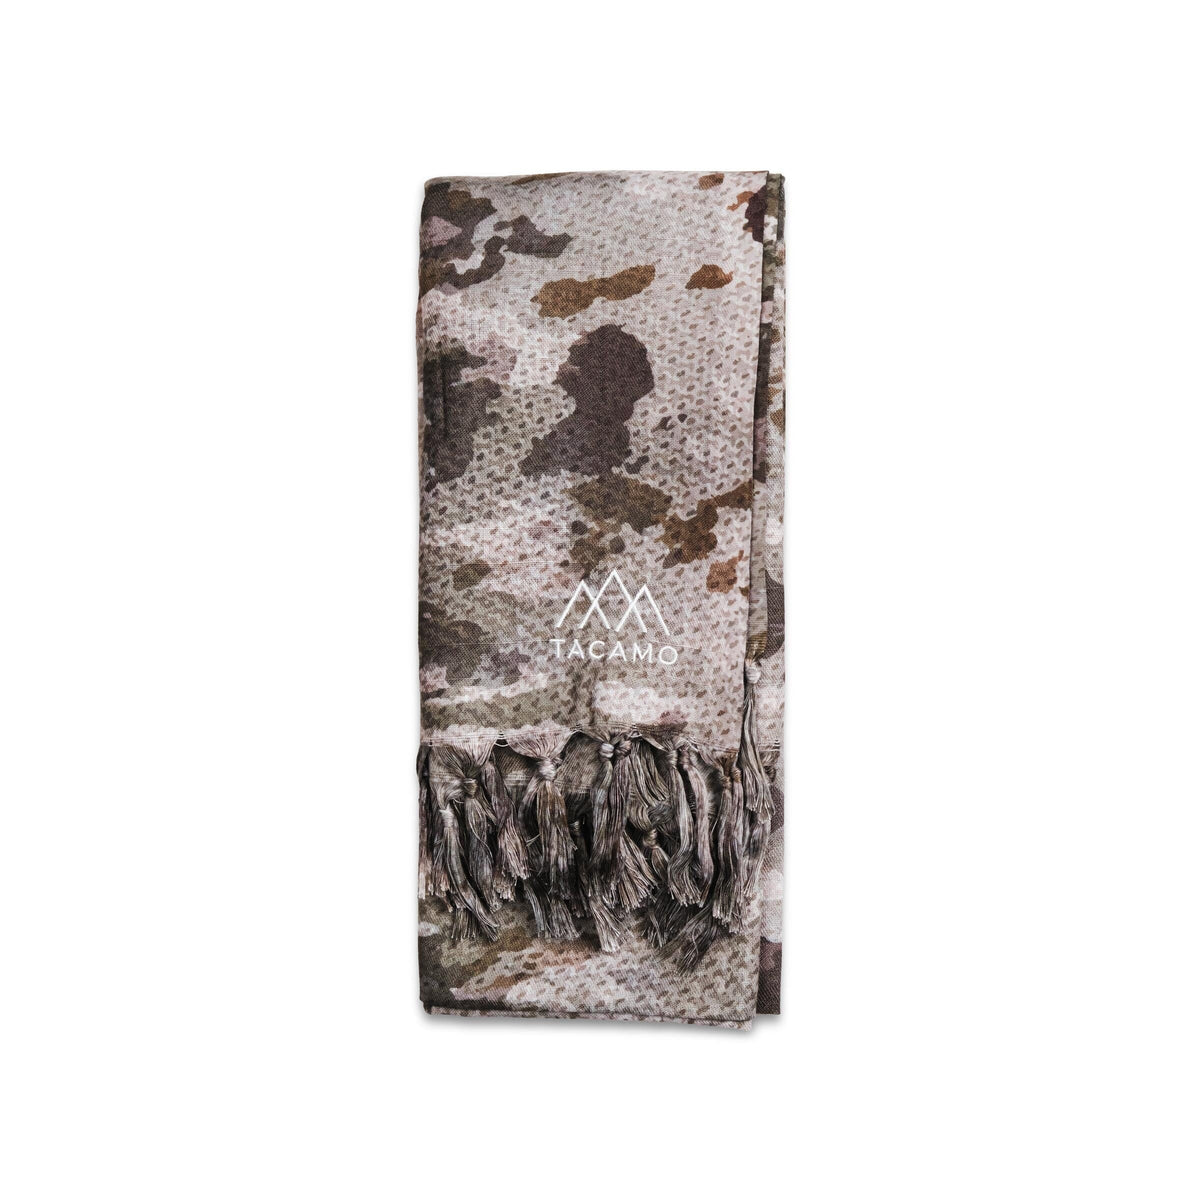 Tactical Shemagh Scarf - Camo Folded